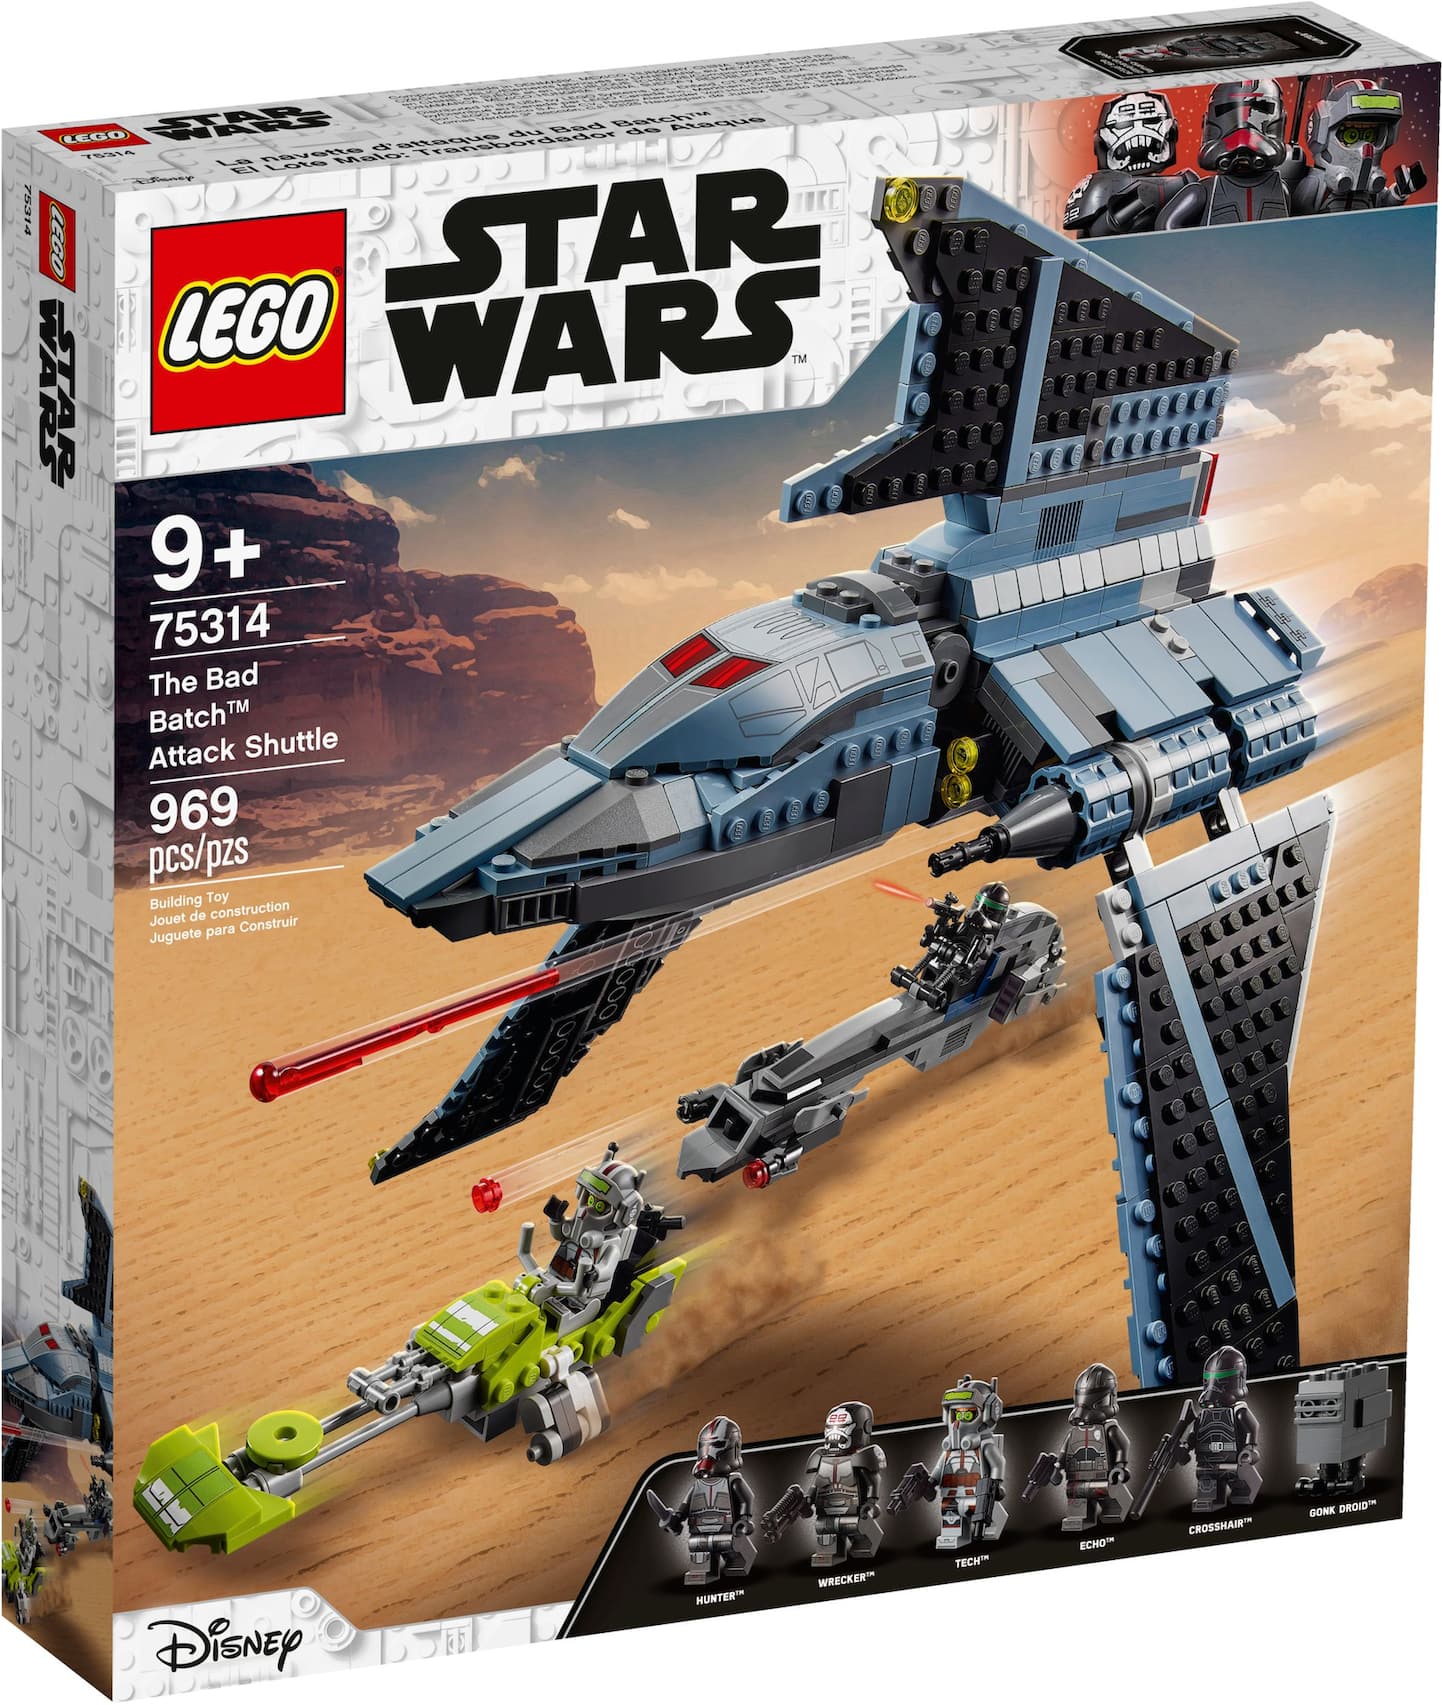 LEGO® Star Wars™ The Bad Batch™ Attack Shuttle - 75314, 969 pcs, Age 9+ | Canadian